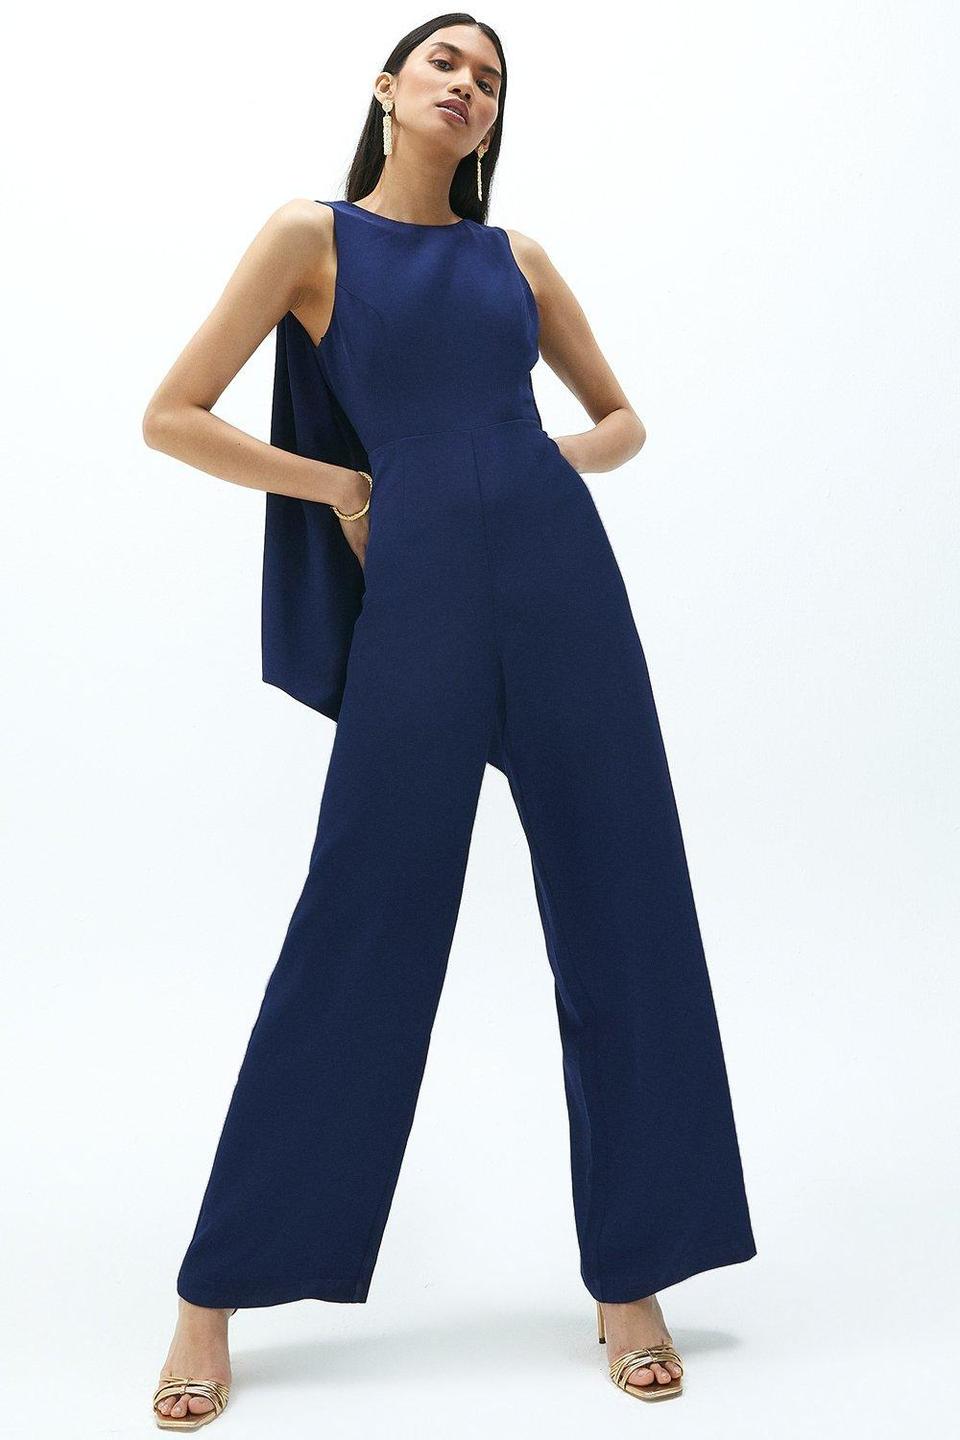 Wedding Guest Jumpsuits: 23 Styles to Suit All Budgets, Shapes and ...